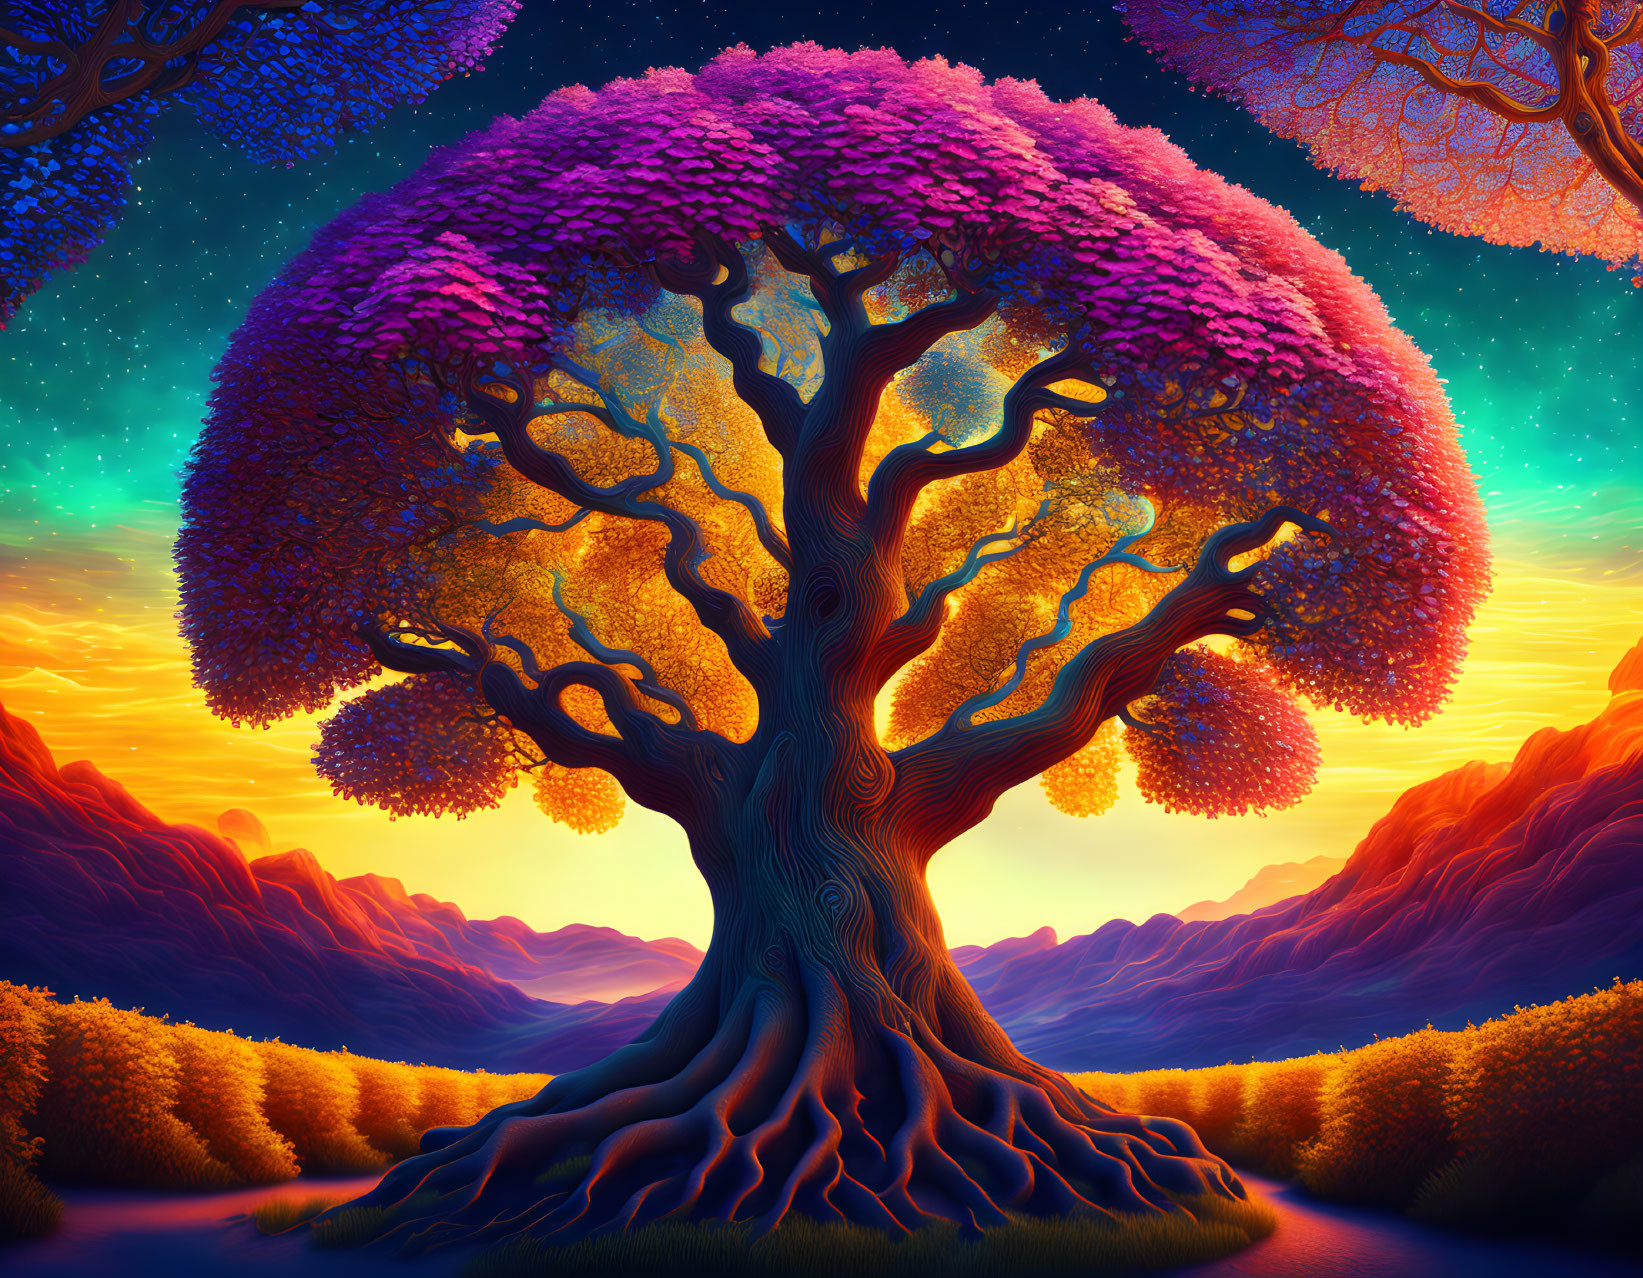 Colorful digital artwork: Majestic tree with purple foliage and surreal sunset landscape